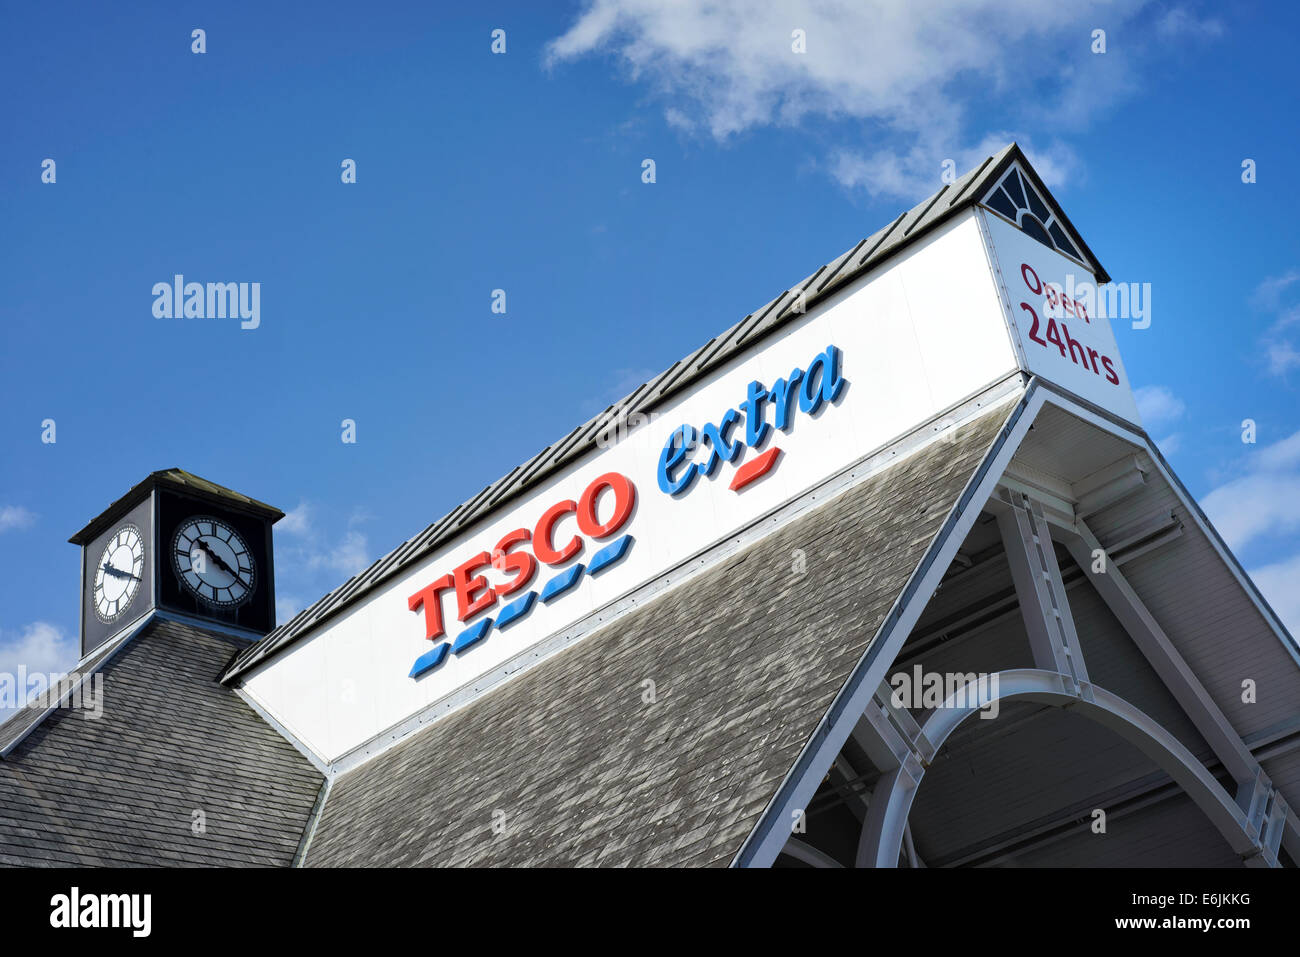 Roof of Tesco Extra store showing branding Stock Photo